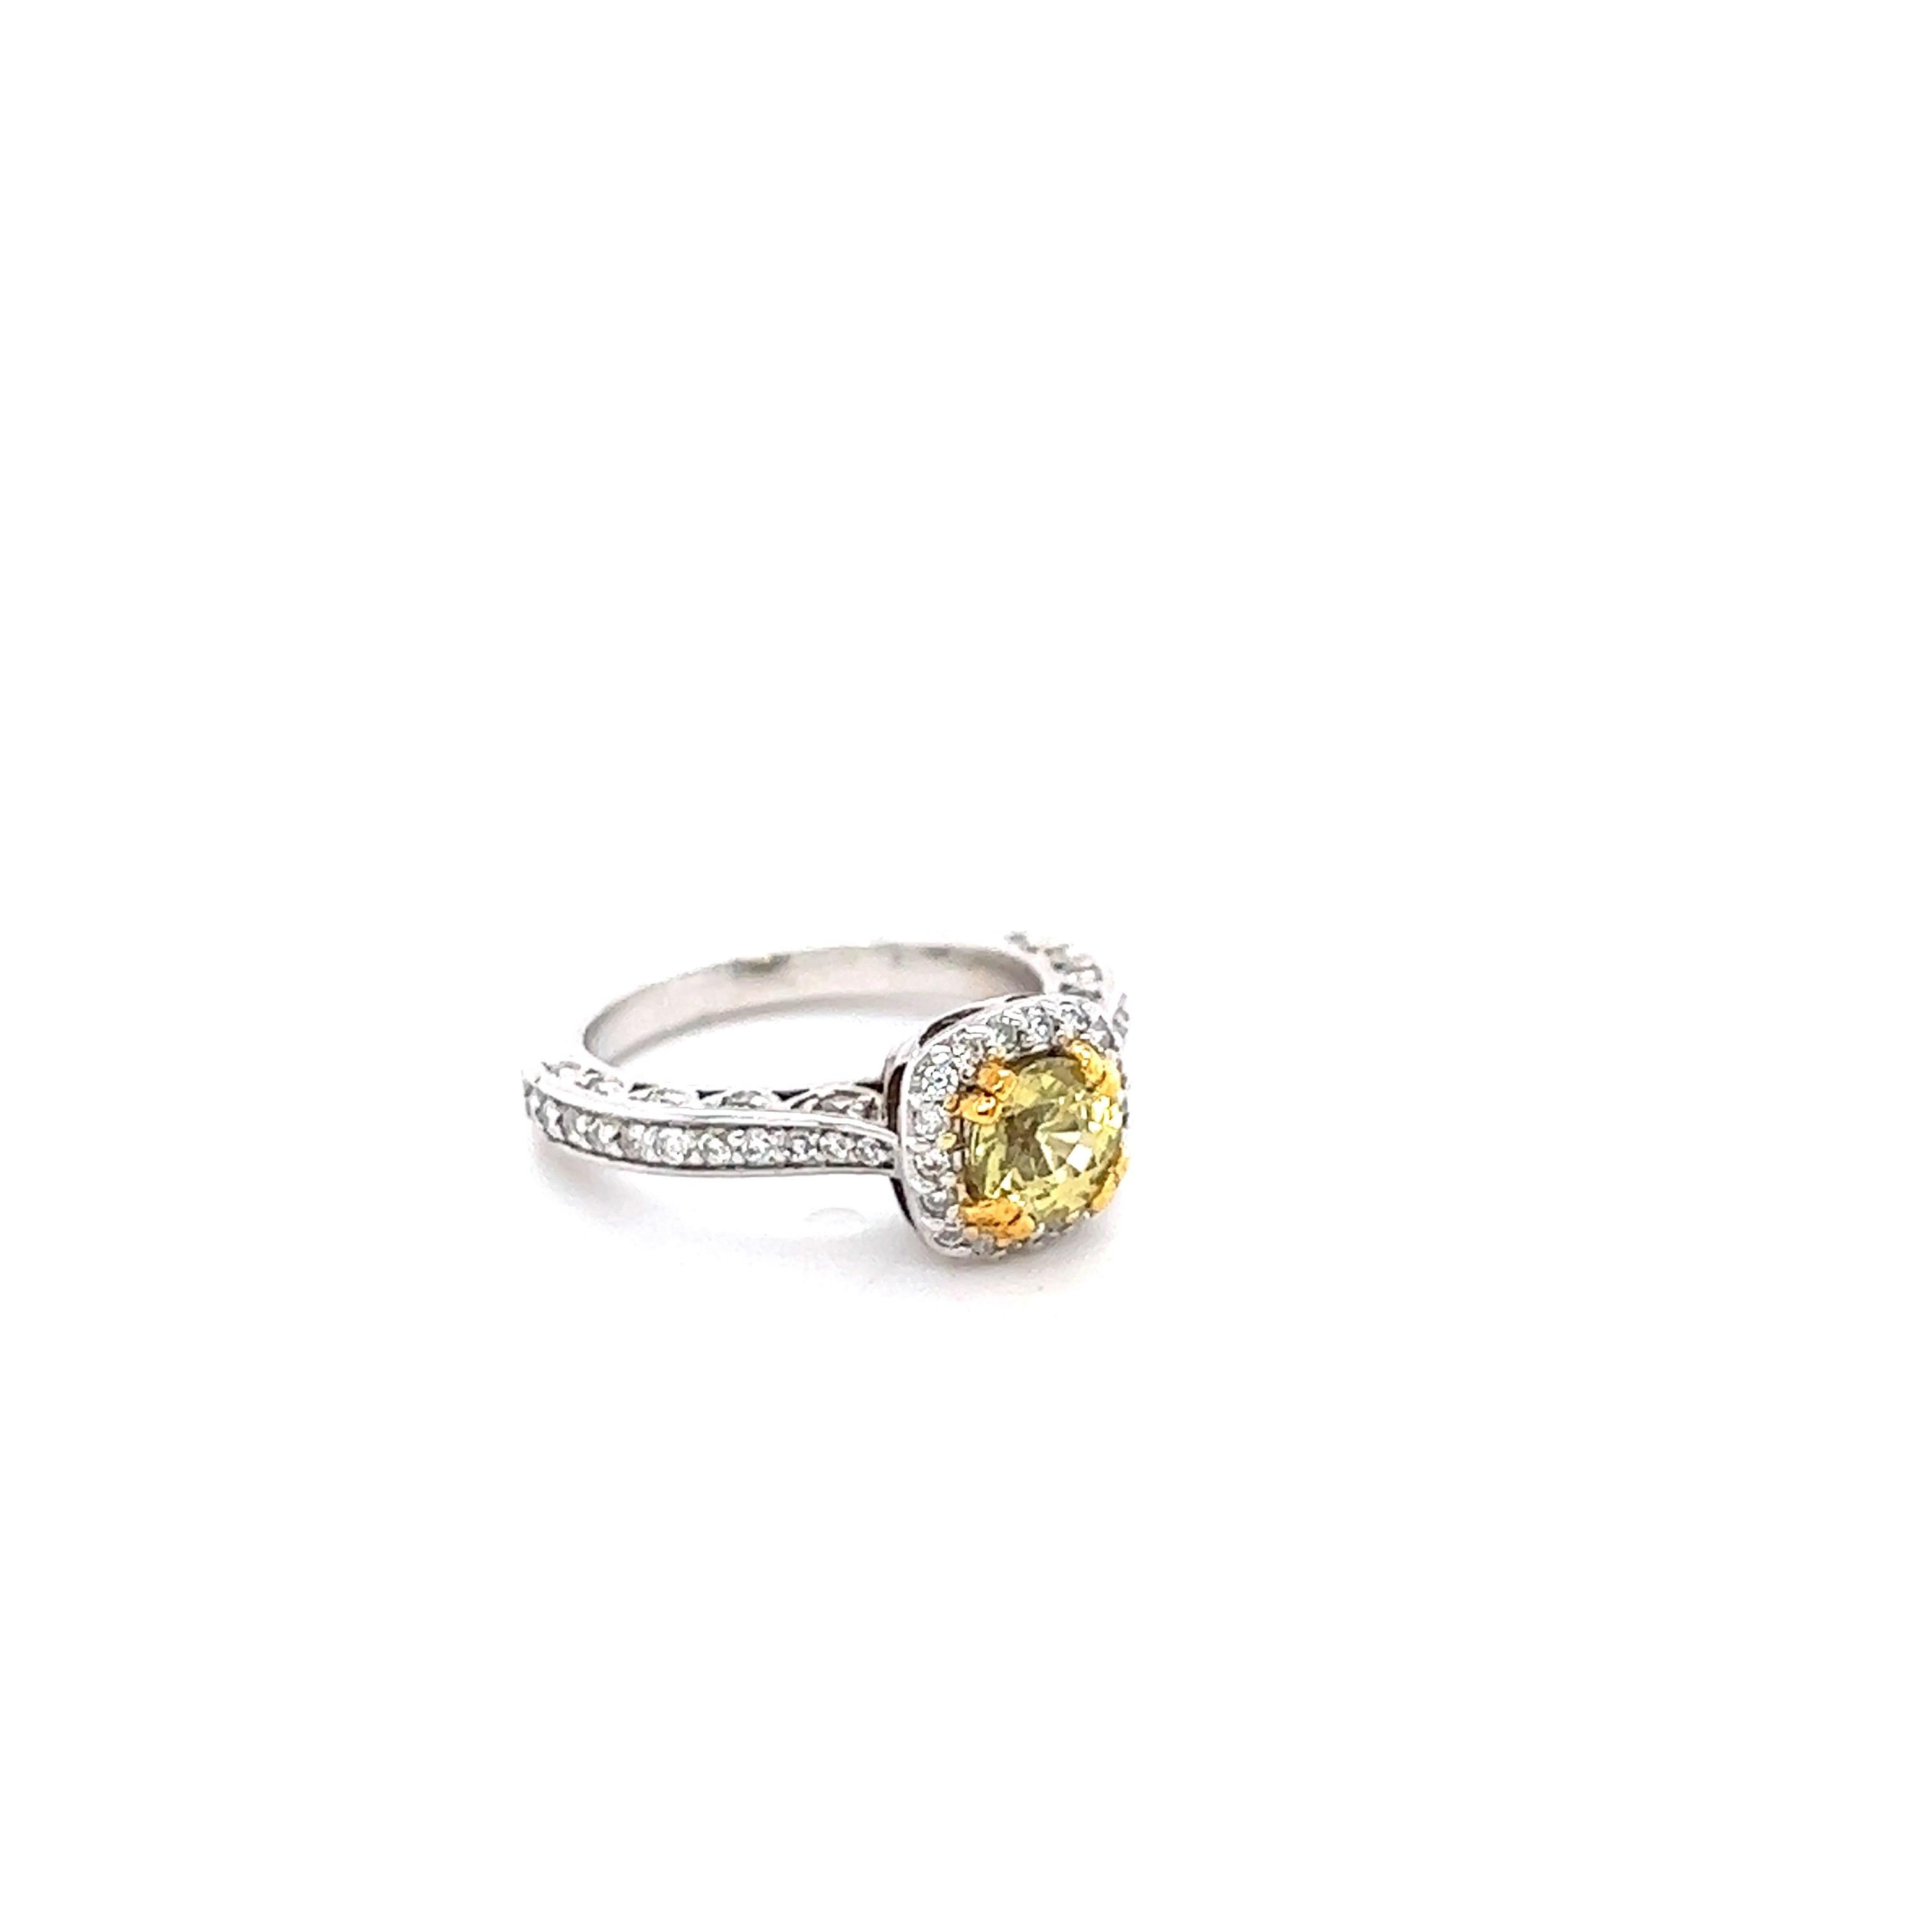 This beautiful ring has a Round Cut Yellow Sapphire that weighs 1.07 Carats. It is surrounded by 60 Round Cut Diamonds that weigh 0.55 Carats. (Clarity: VS, Color: H) 
The Yellow Sapphire measures at 5 mm.  
The total carat weight of the ring is